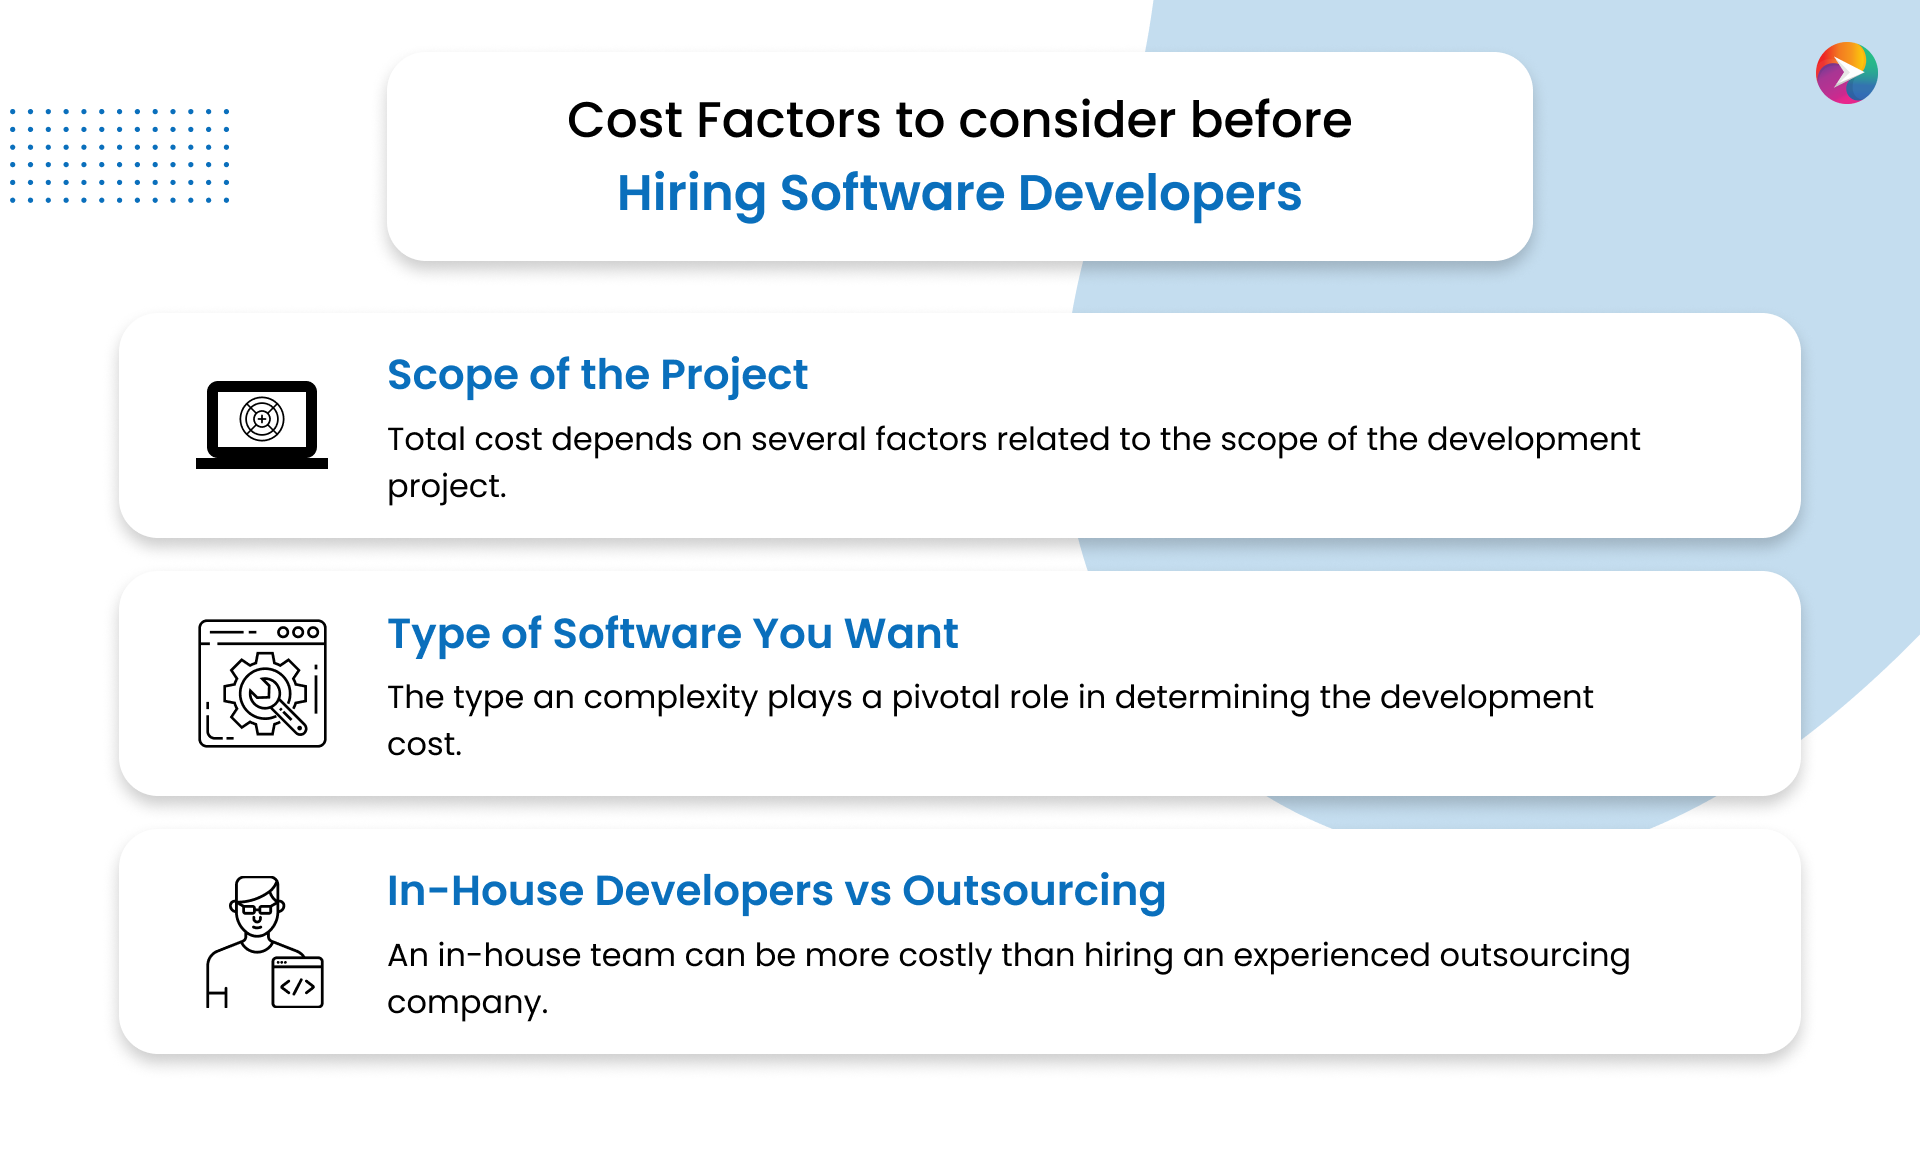 This image contains the heading cost factors to consider before hiring software developer and in the bottom 3 factors are there.